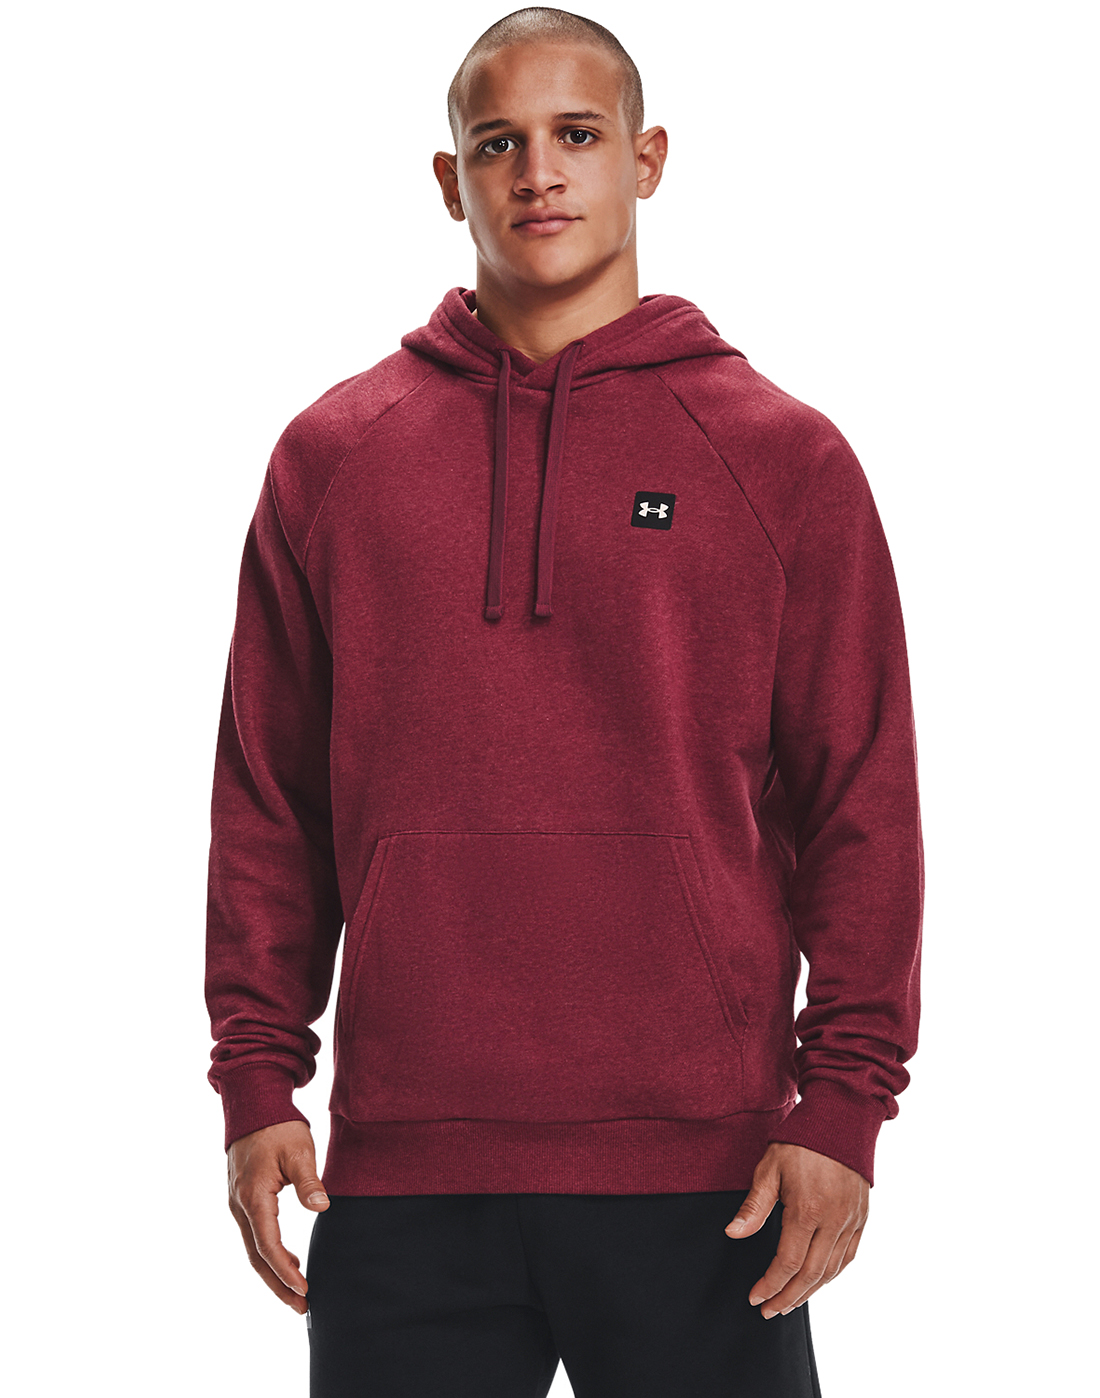 Under Armour Mens Rival Fleece Hoodie - Red | Life Style Sports IE